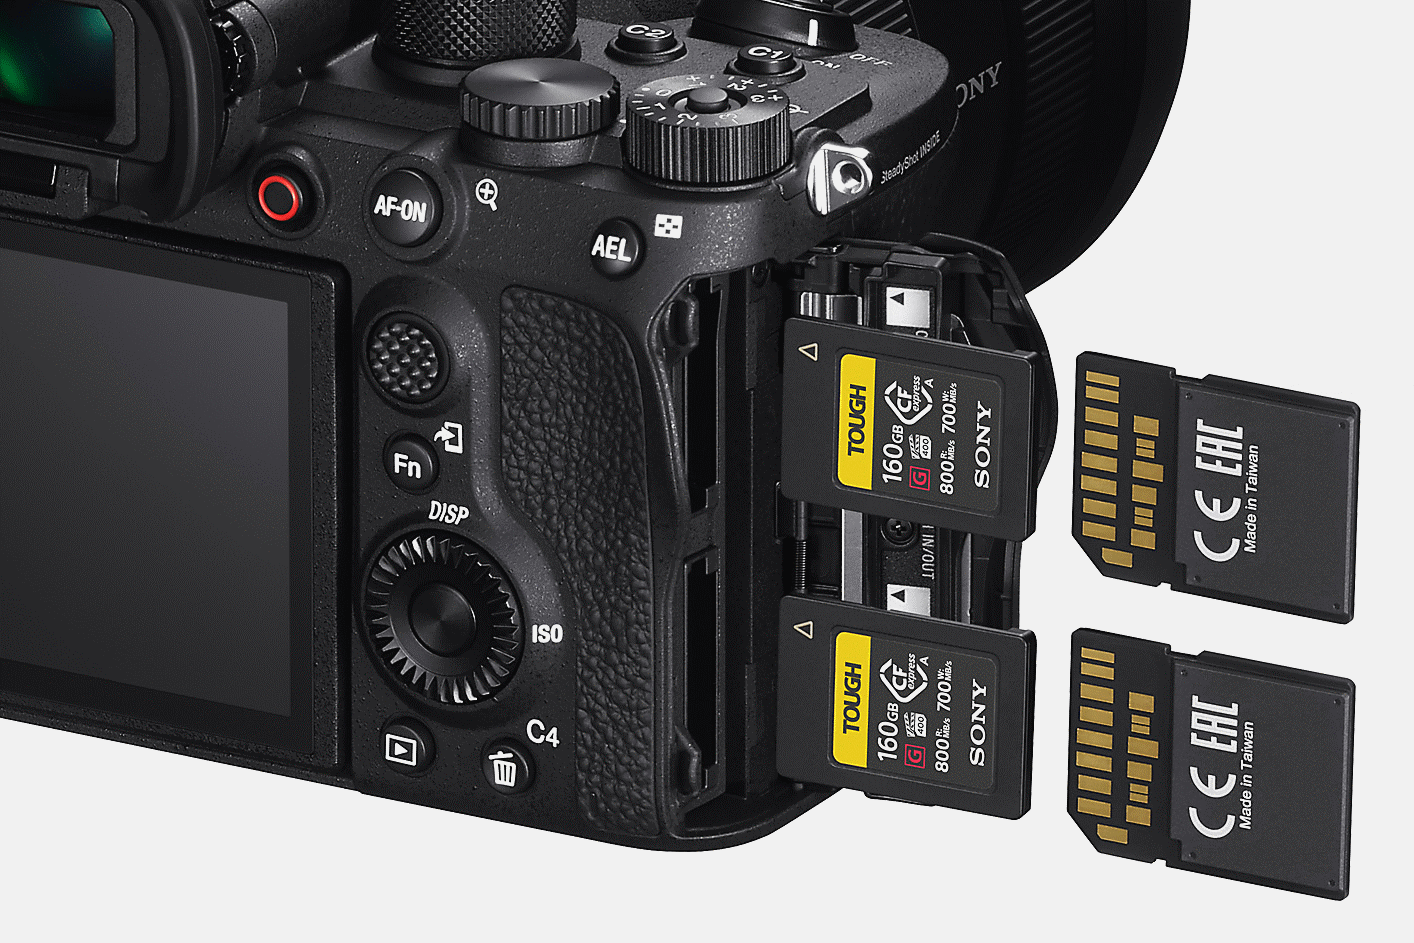 Camera rear view with two SD cards